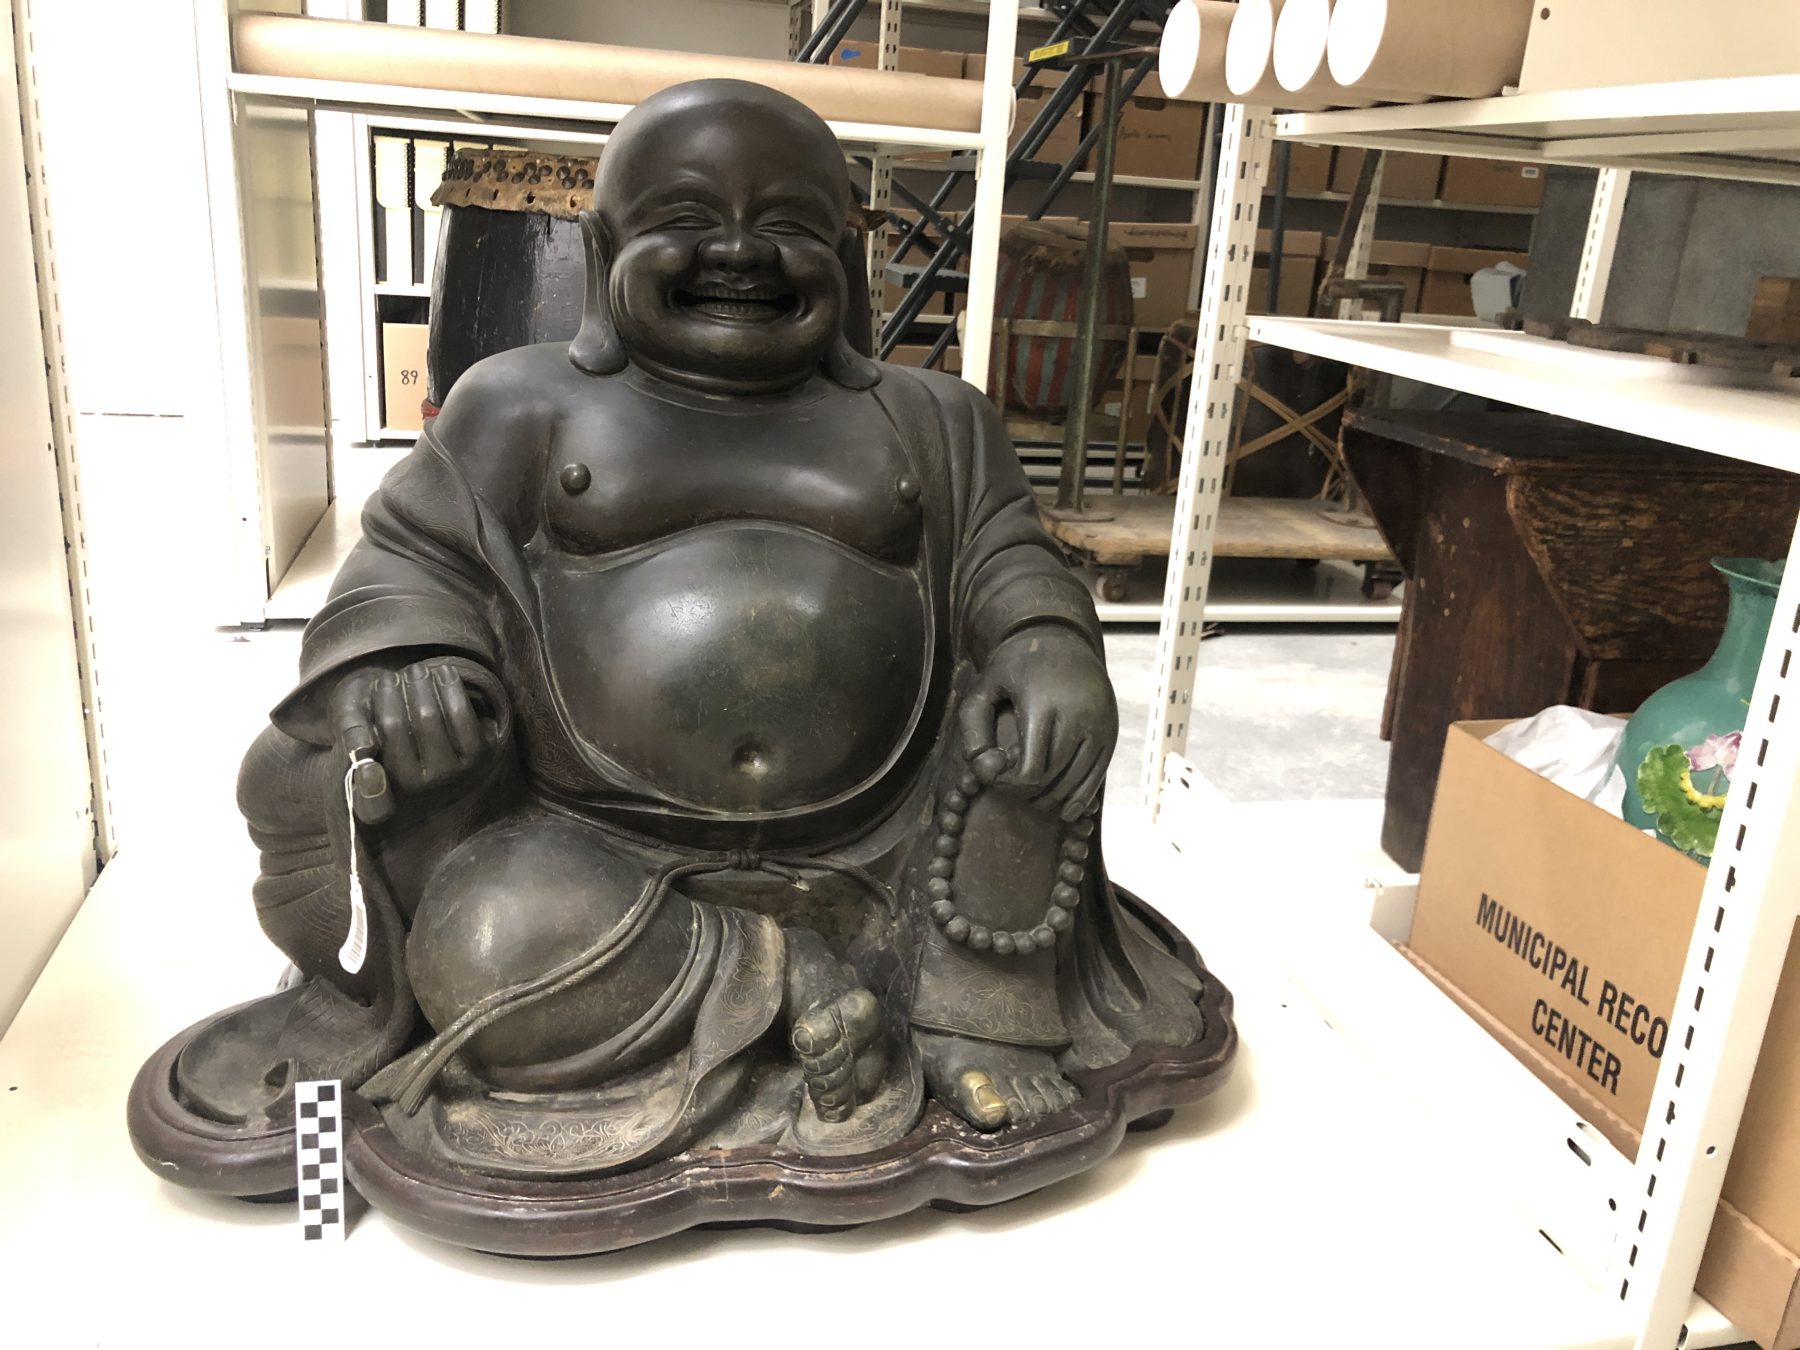 T-2034874 and T-2035267 Large bronze Laughing Buddha from the Savoy Inn, a Chinese restaurant opened by Edward L. Hong in Freeport, Long Island in 1933. Measures approximately 4 ft. tall x 3 ft wide. Photograph taken post-fire. Courtesy of Rocky Chin, Museum of Chinese in America (MOCA) Collection.